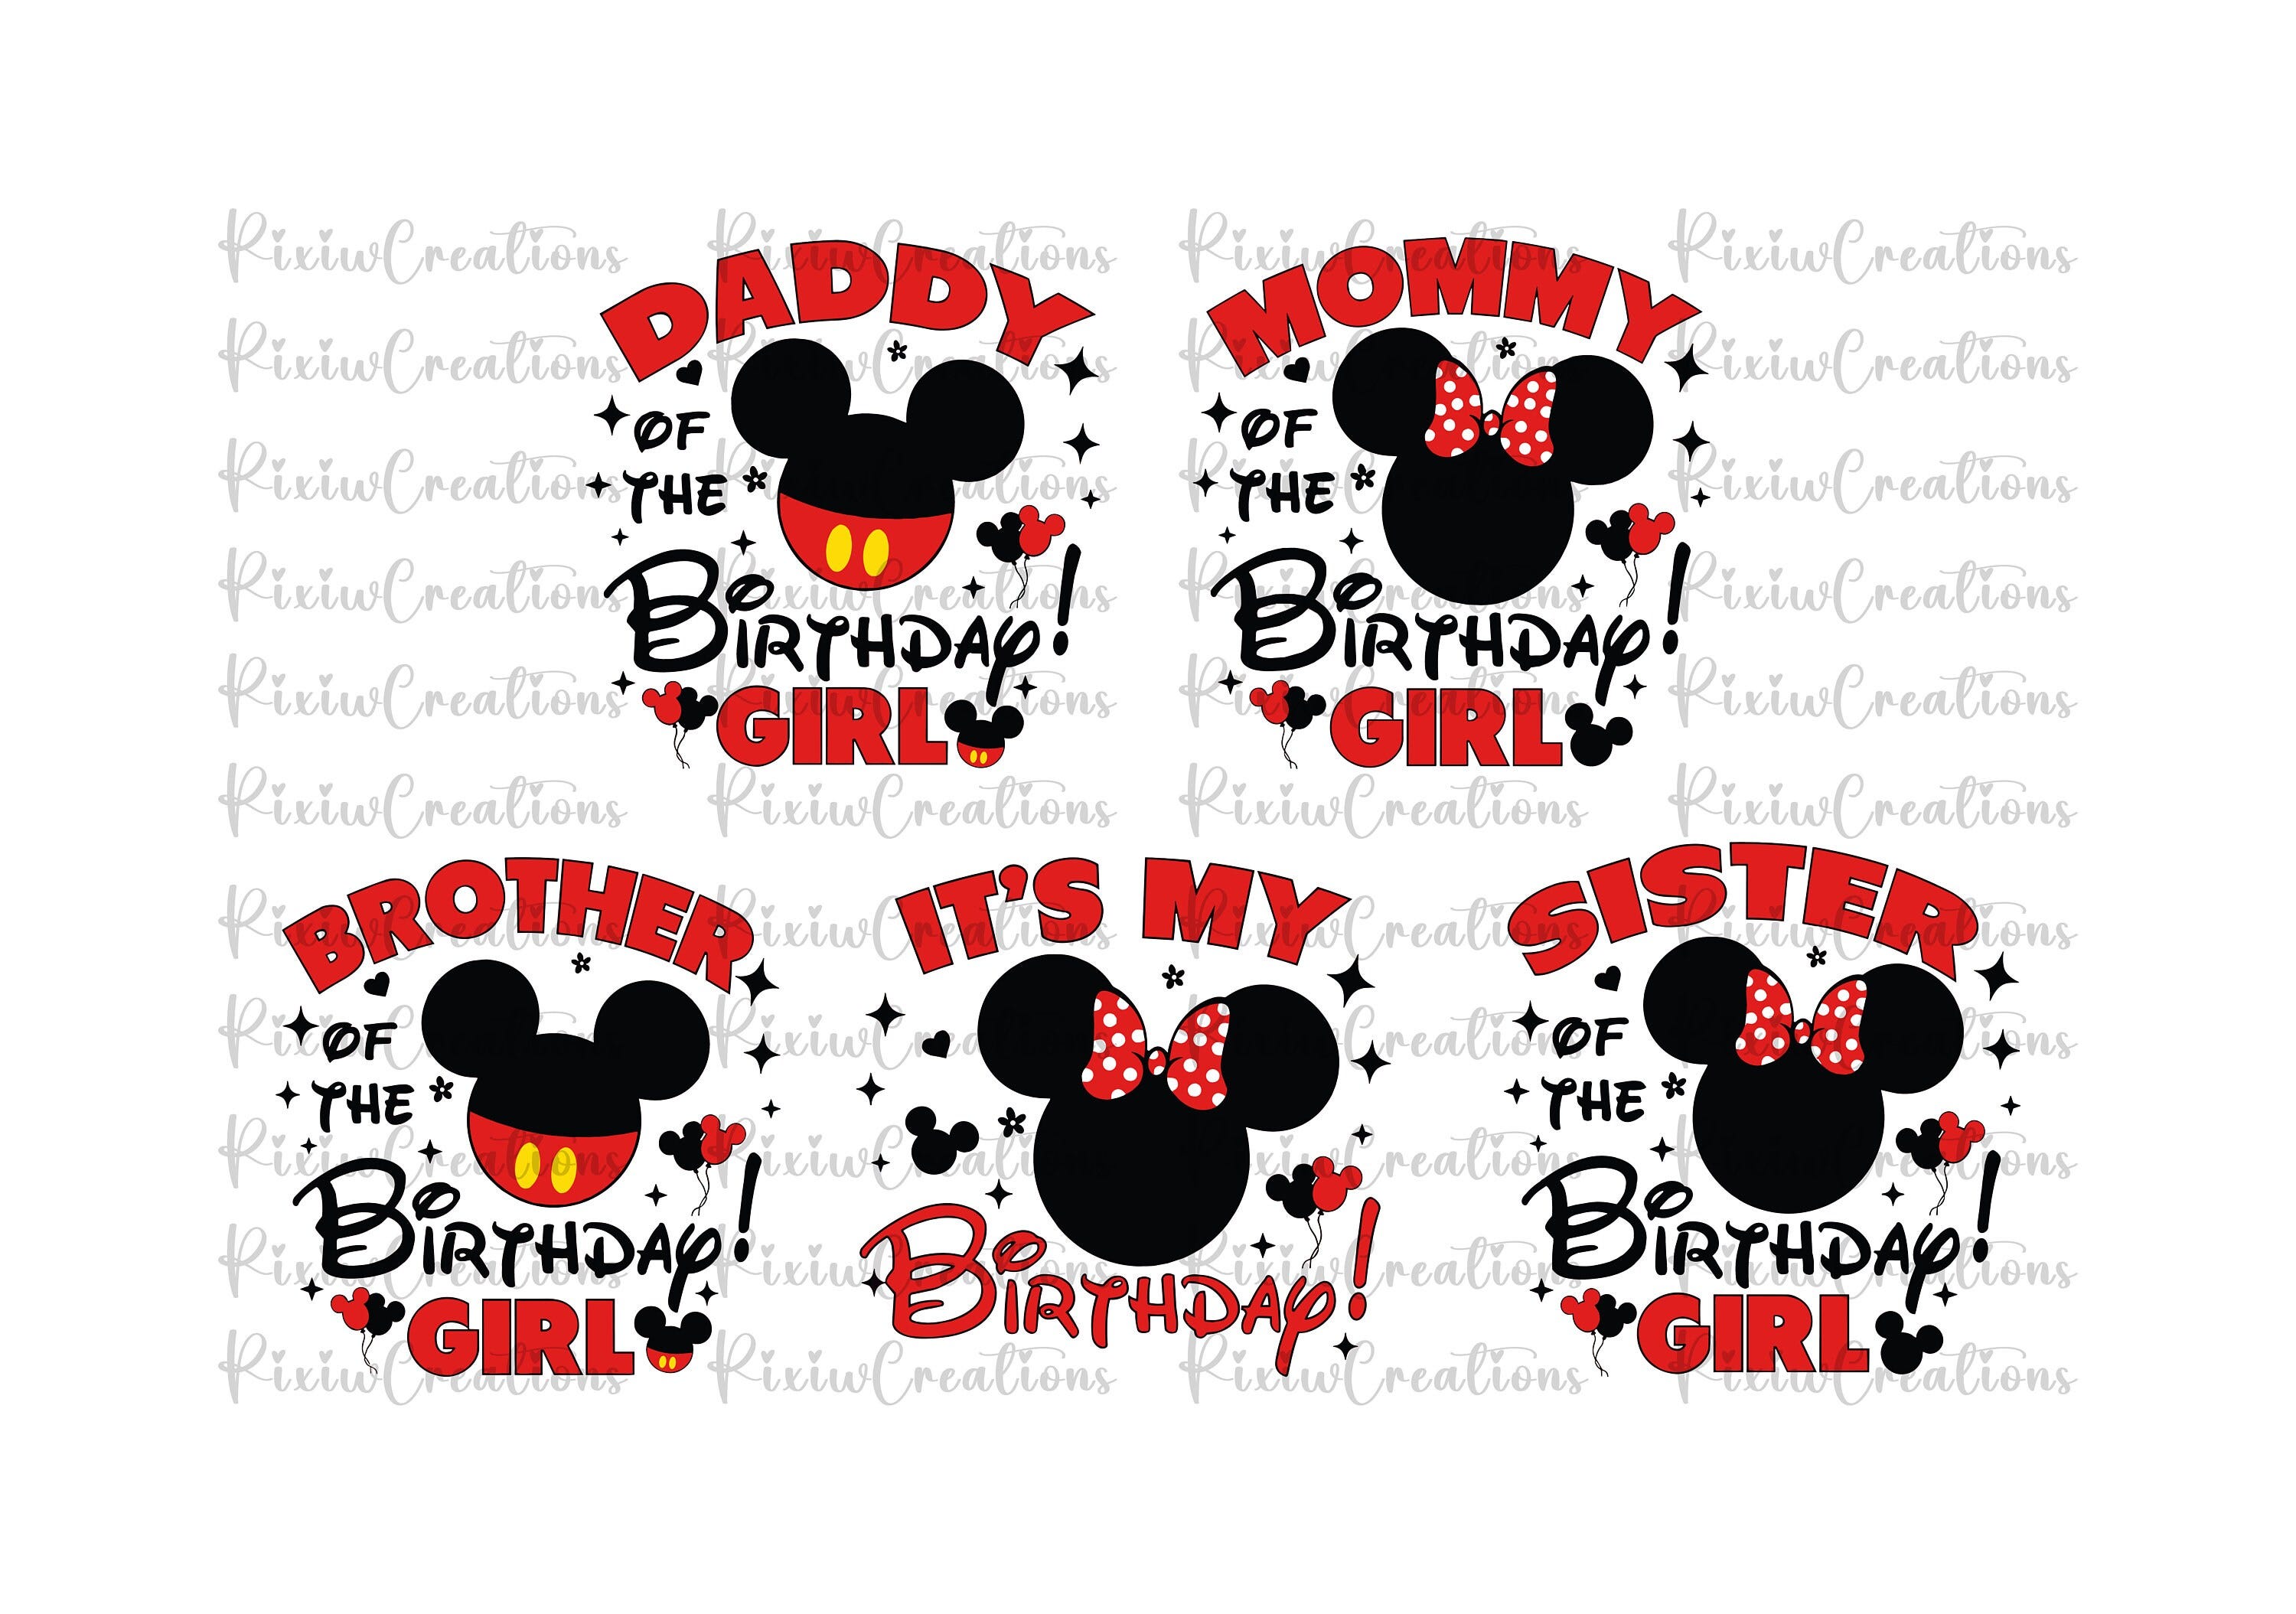 Birthday Squad SVG, Bundle Squad Svg, Birthday Girl Png, Birthday Boy Svg, Vacay Mode Svg, Family Trip Png, Files For Cricut Sublimation